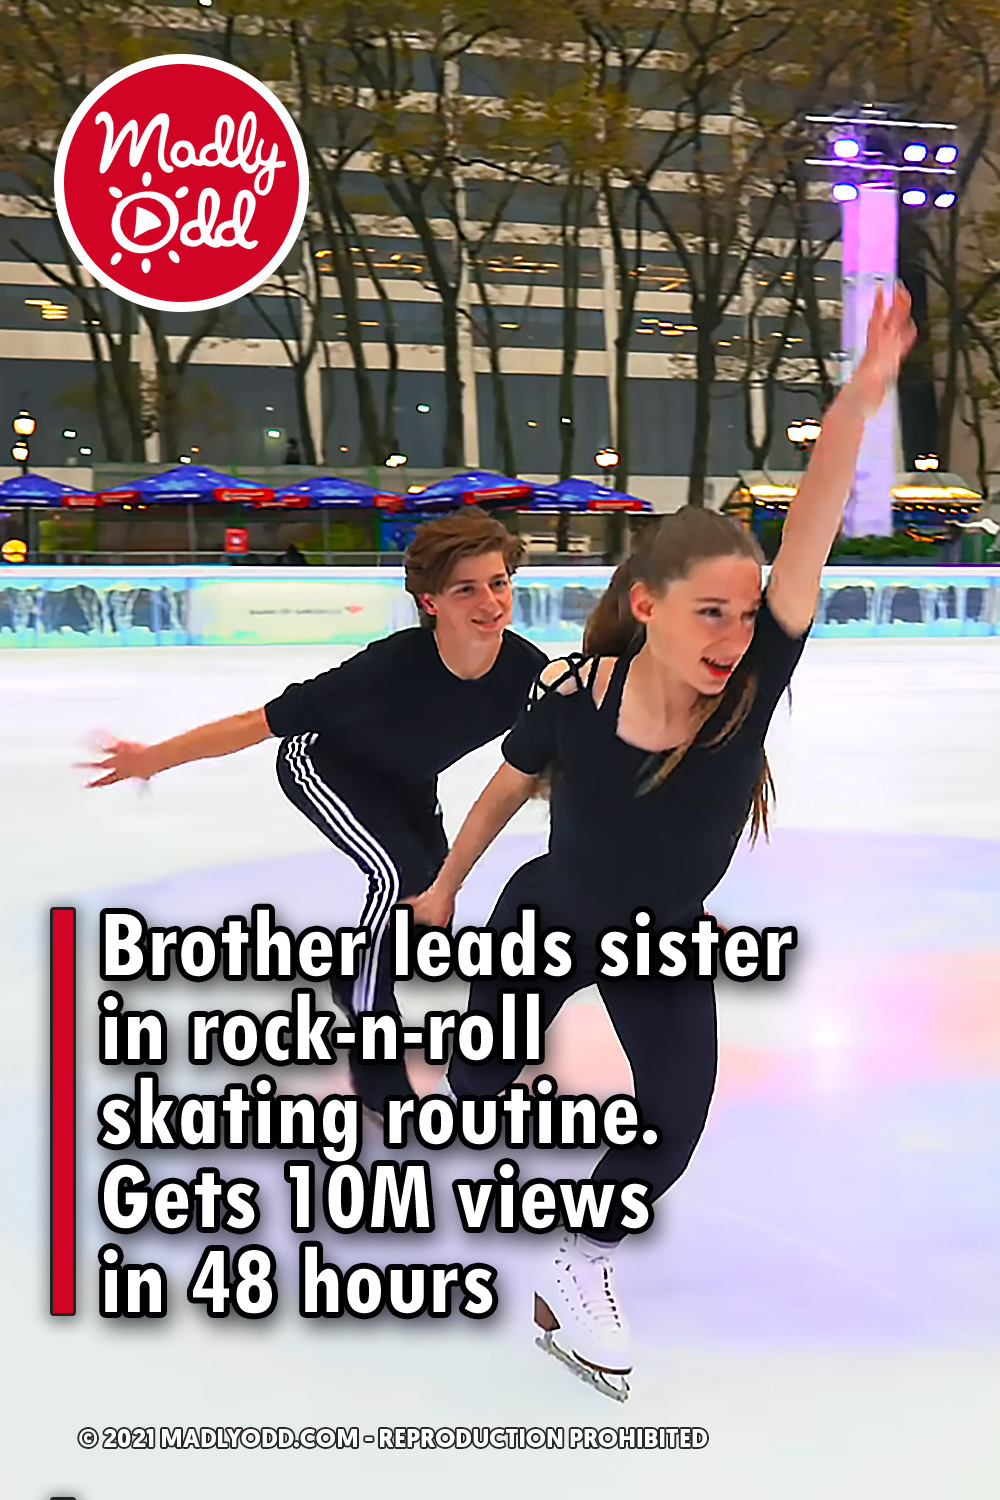 Brother leads sister in rock-n-roll skating routine. Gets 10M views in 48 hours